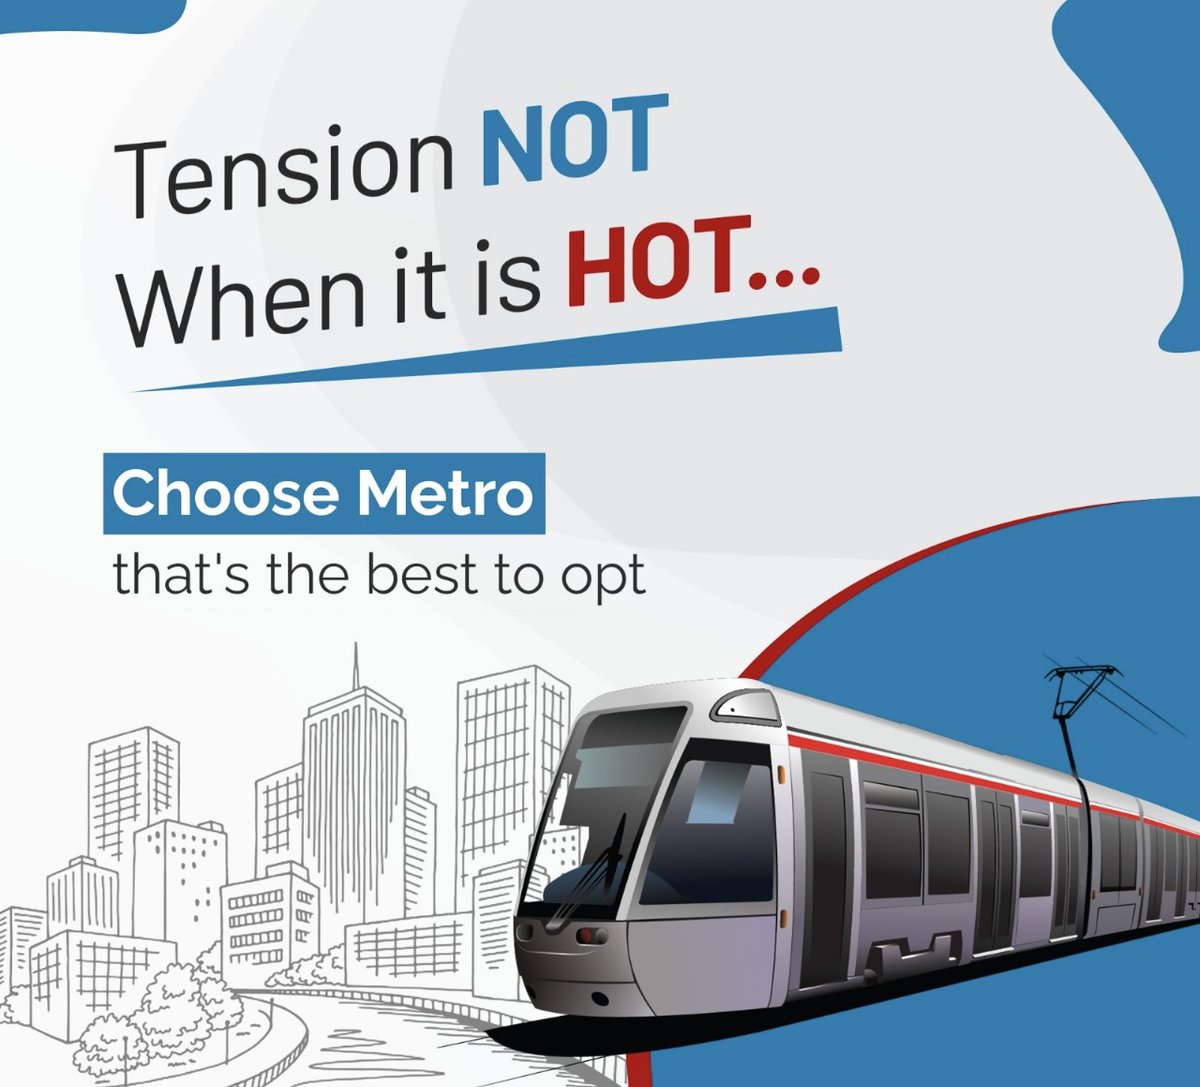 Beat the heat this summer with a cool and convenient metro ride! Stay comfortable and save time by choosing the metro as your preferred mode of travel in this scorching weather. #UrbanTransport #ChooseMetro #MetroZindagi